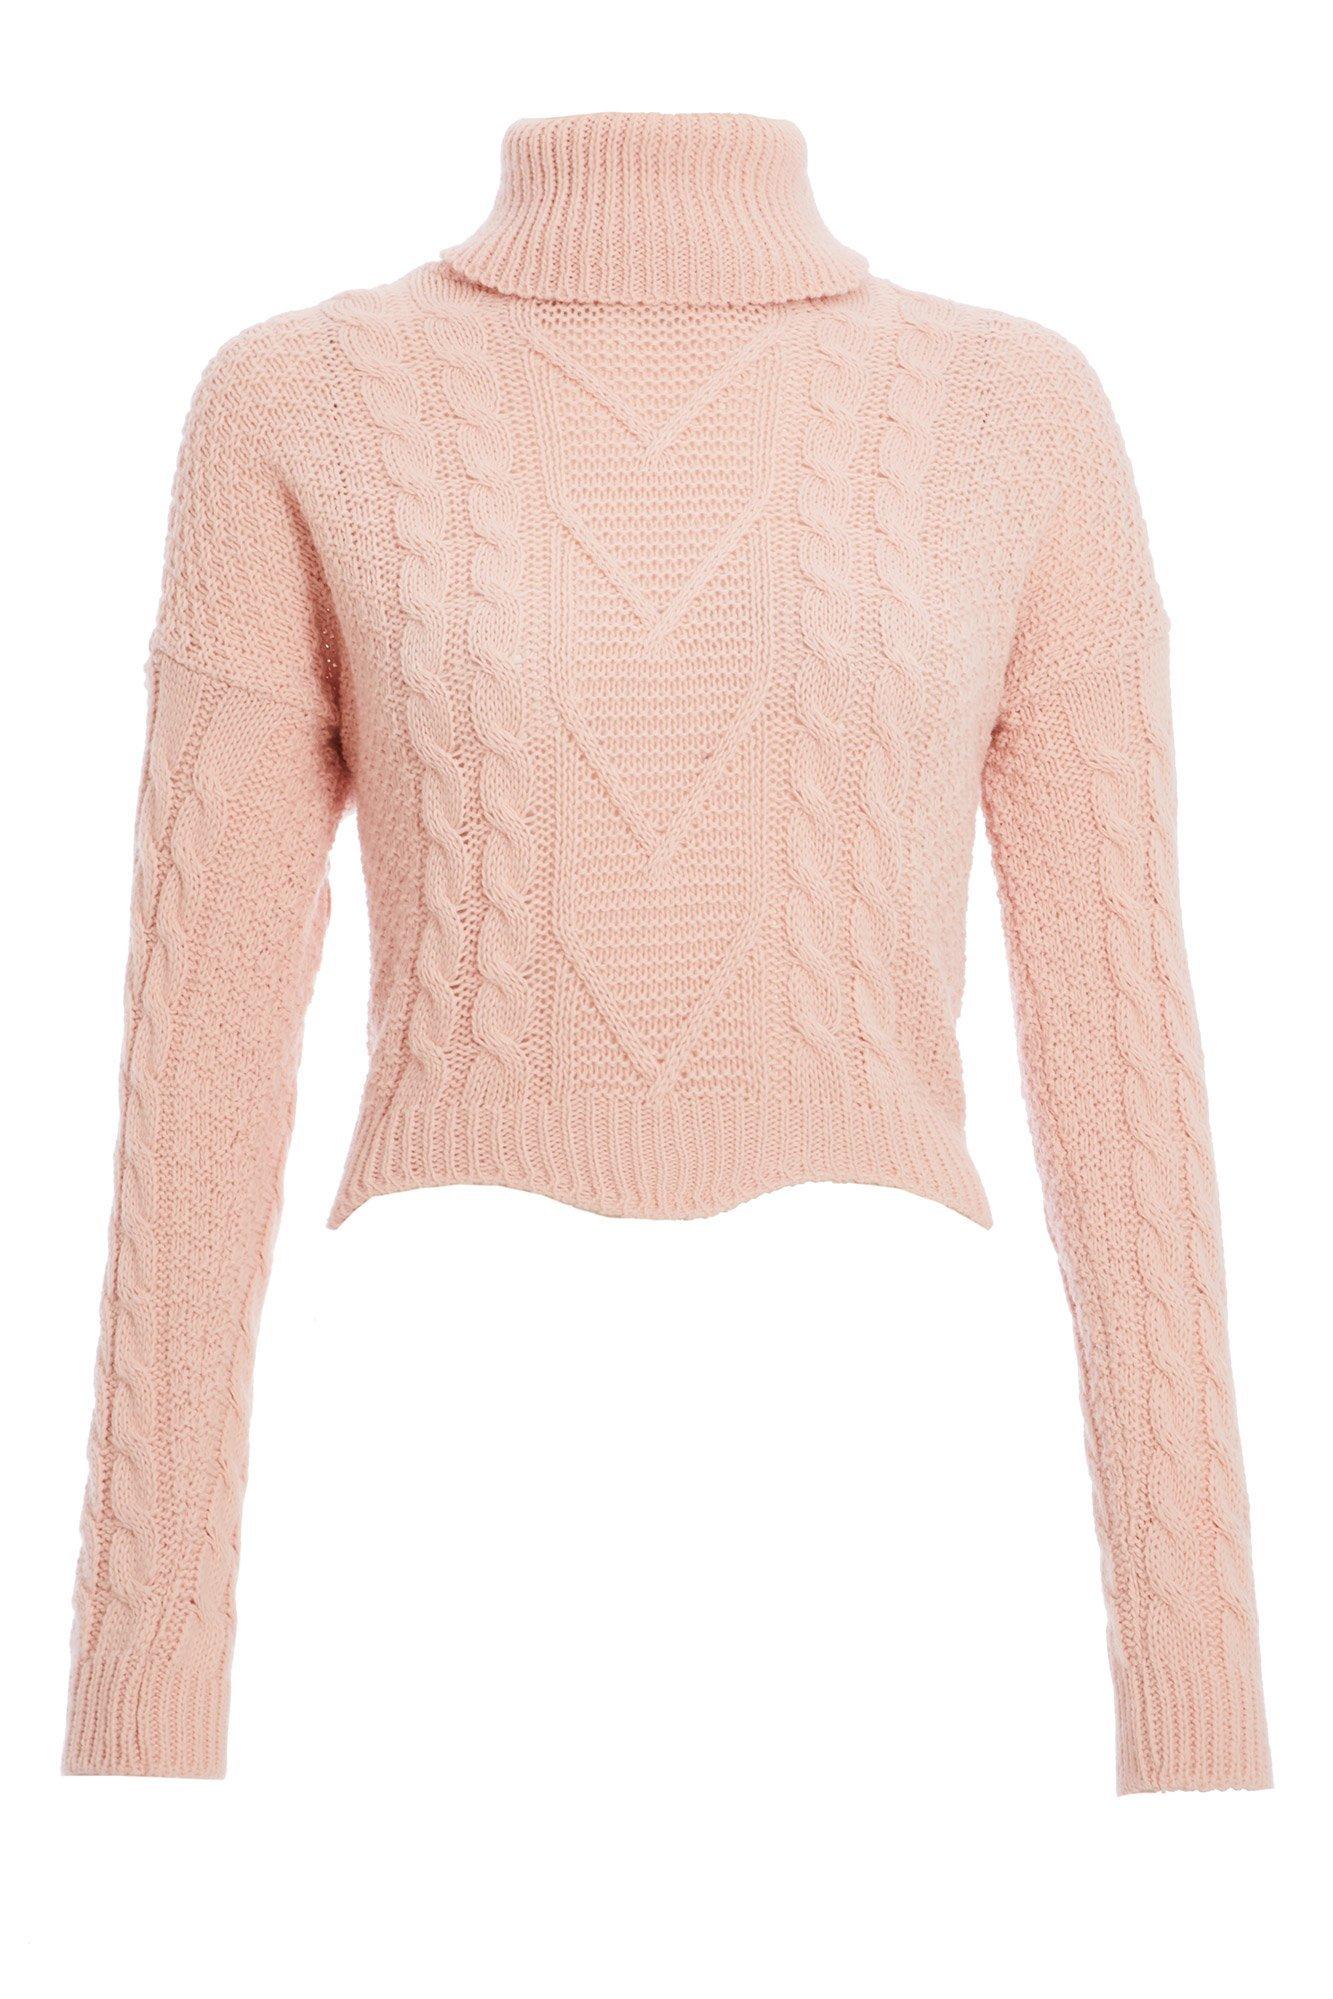 Pink Knitted Crop Jumper - Quiz Clothing